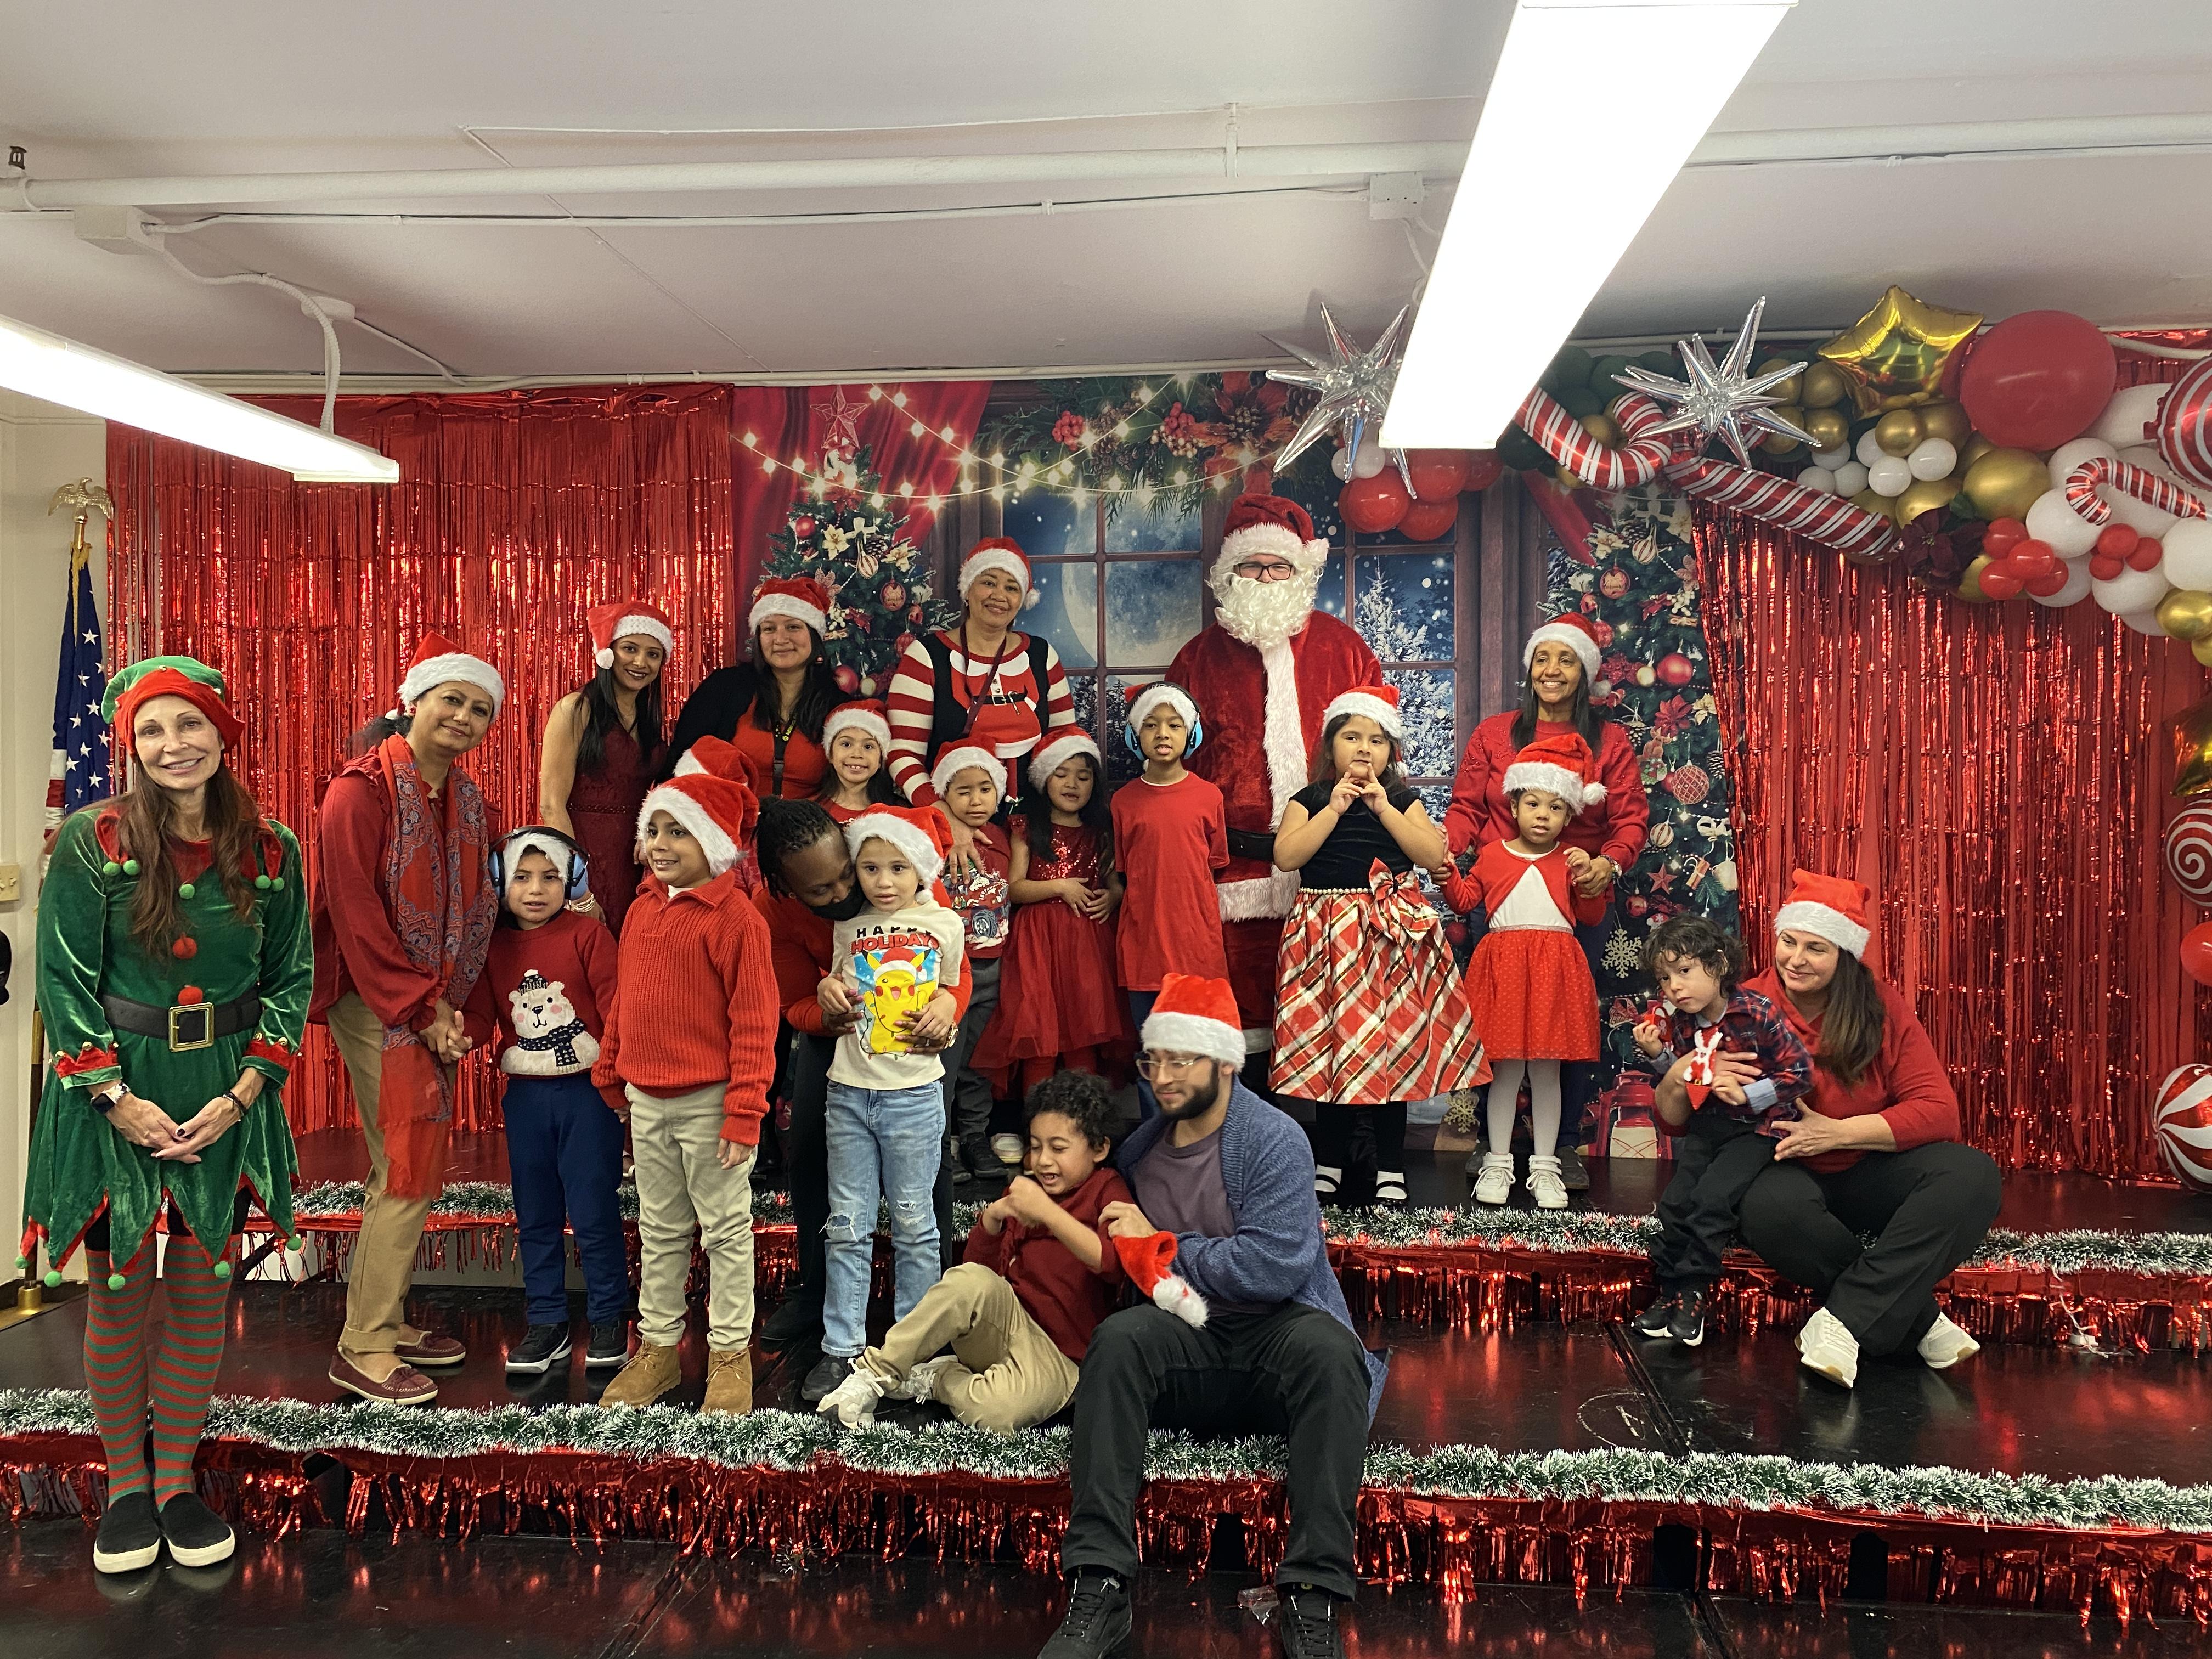 Concluding Holiday Cheer Week at the Jefferson School